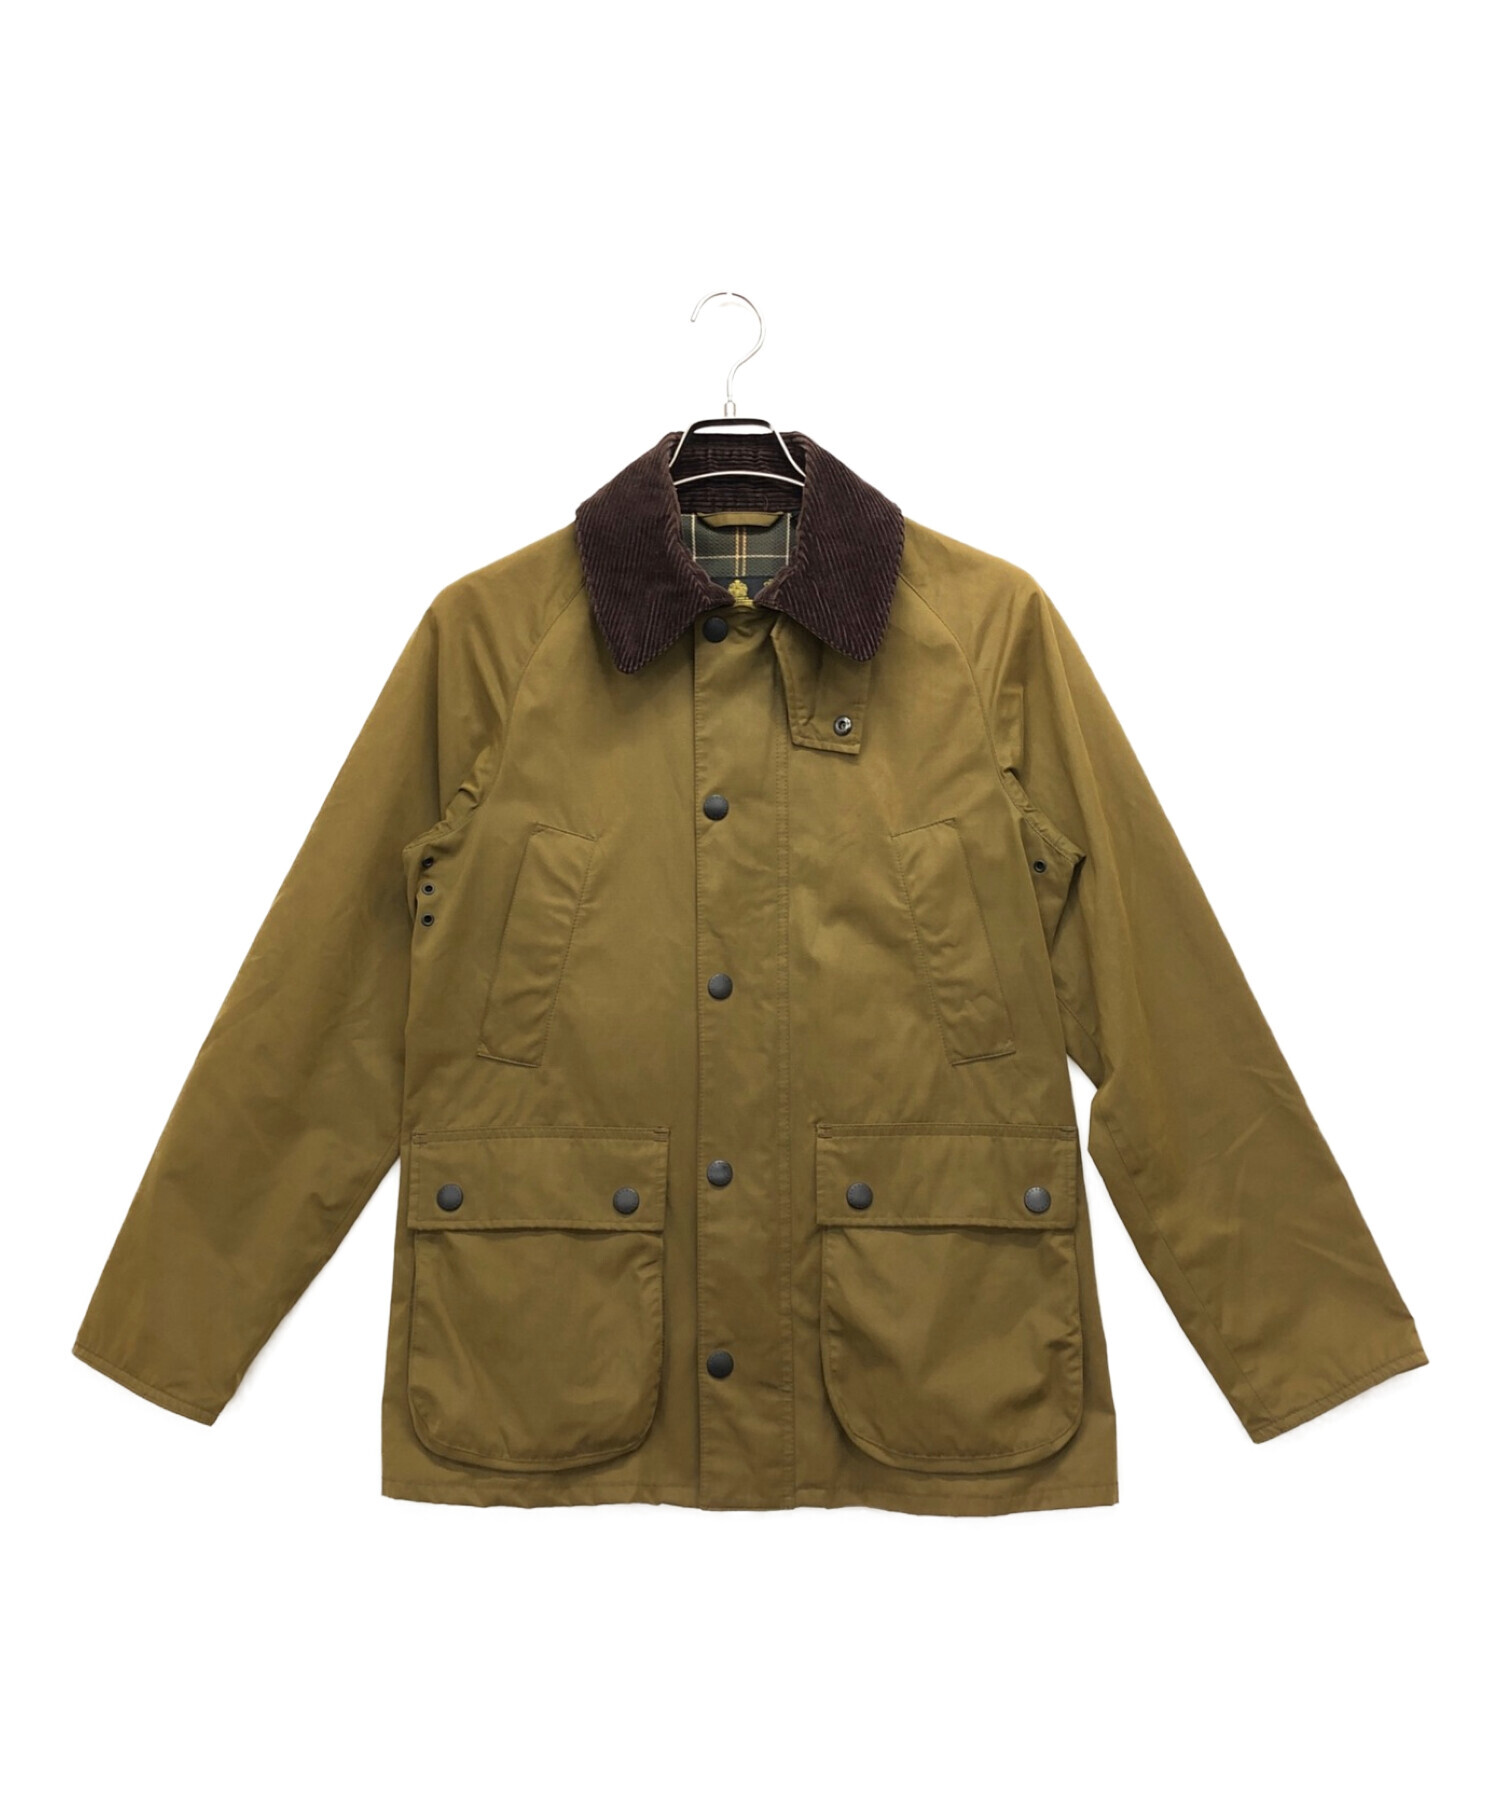 Barbour / BEDALE SL / Peached / Beige